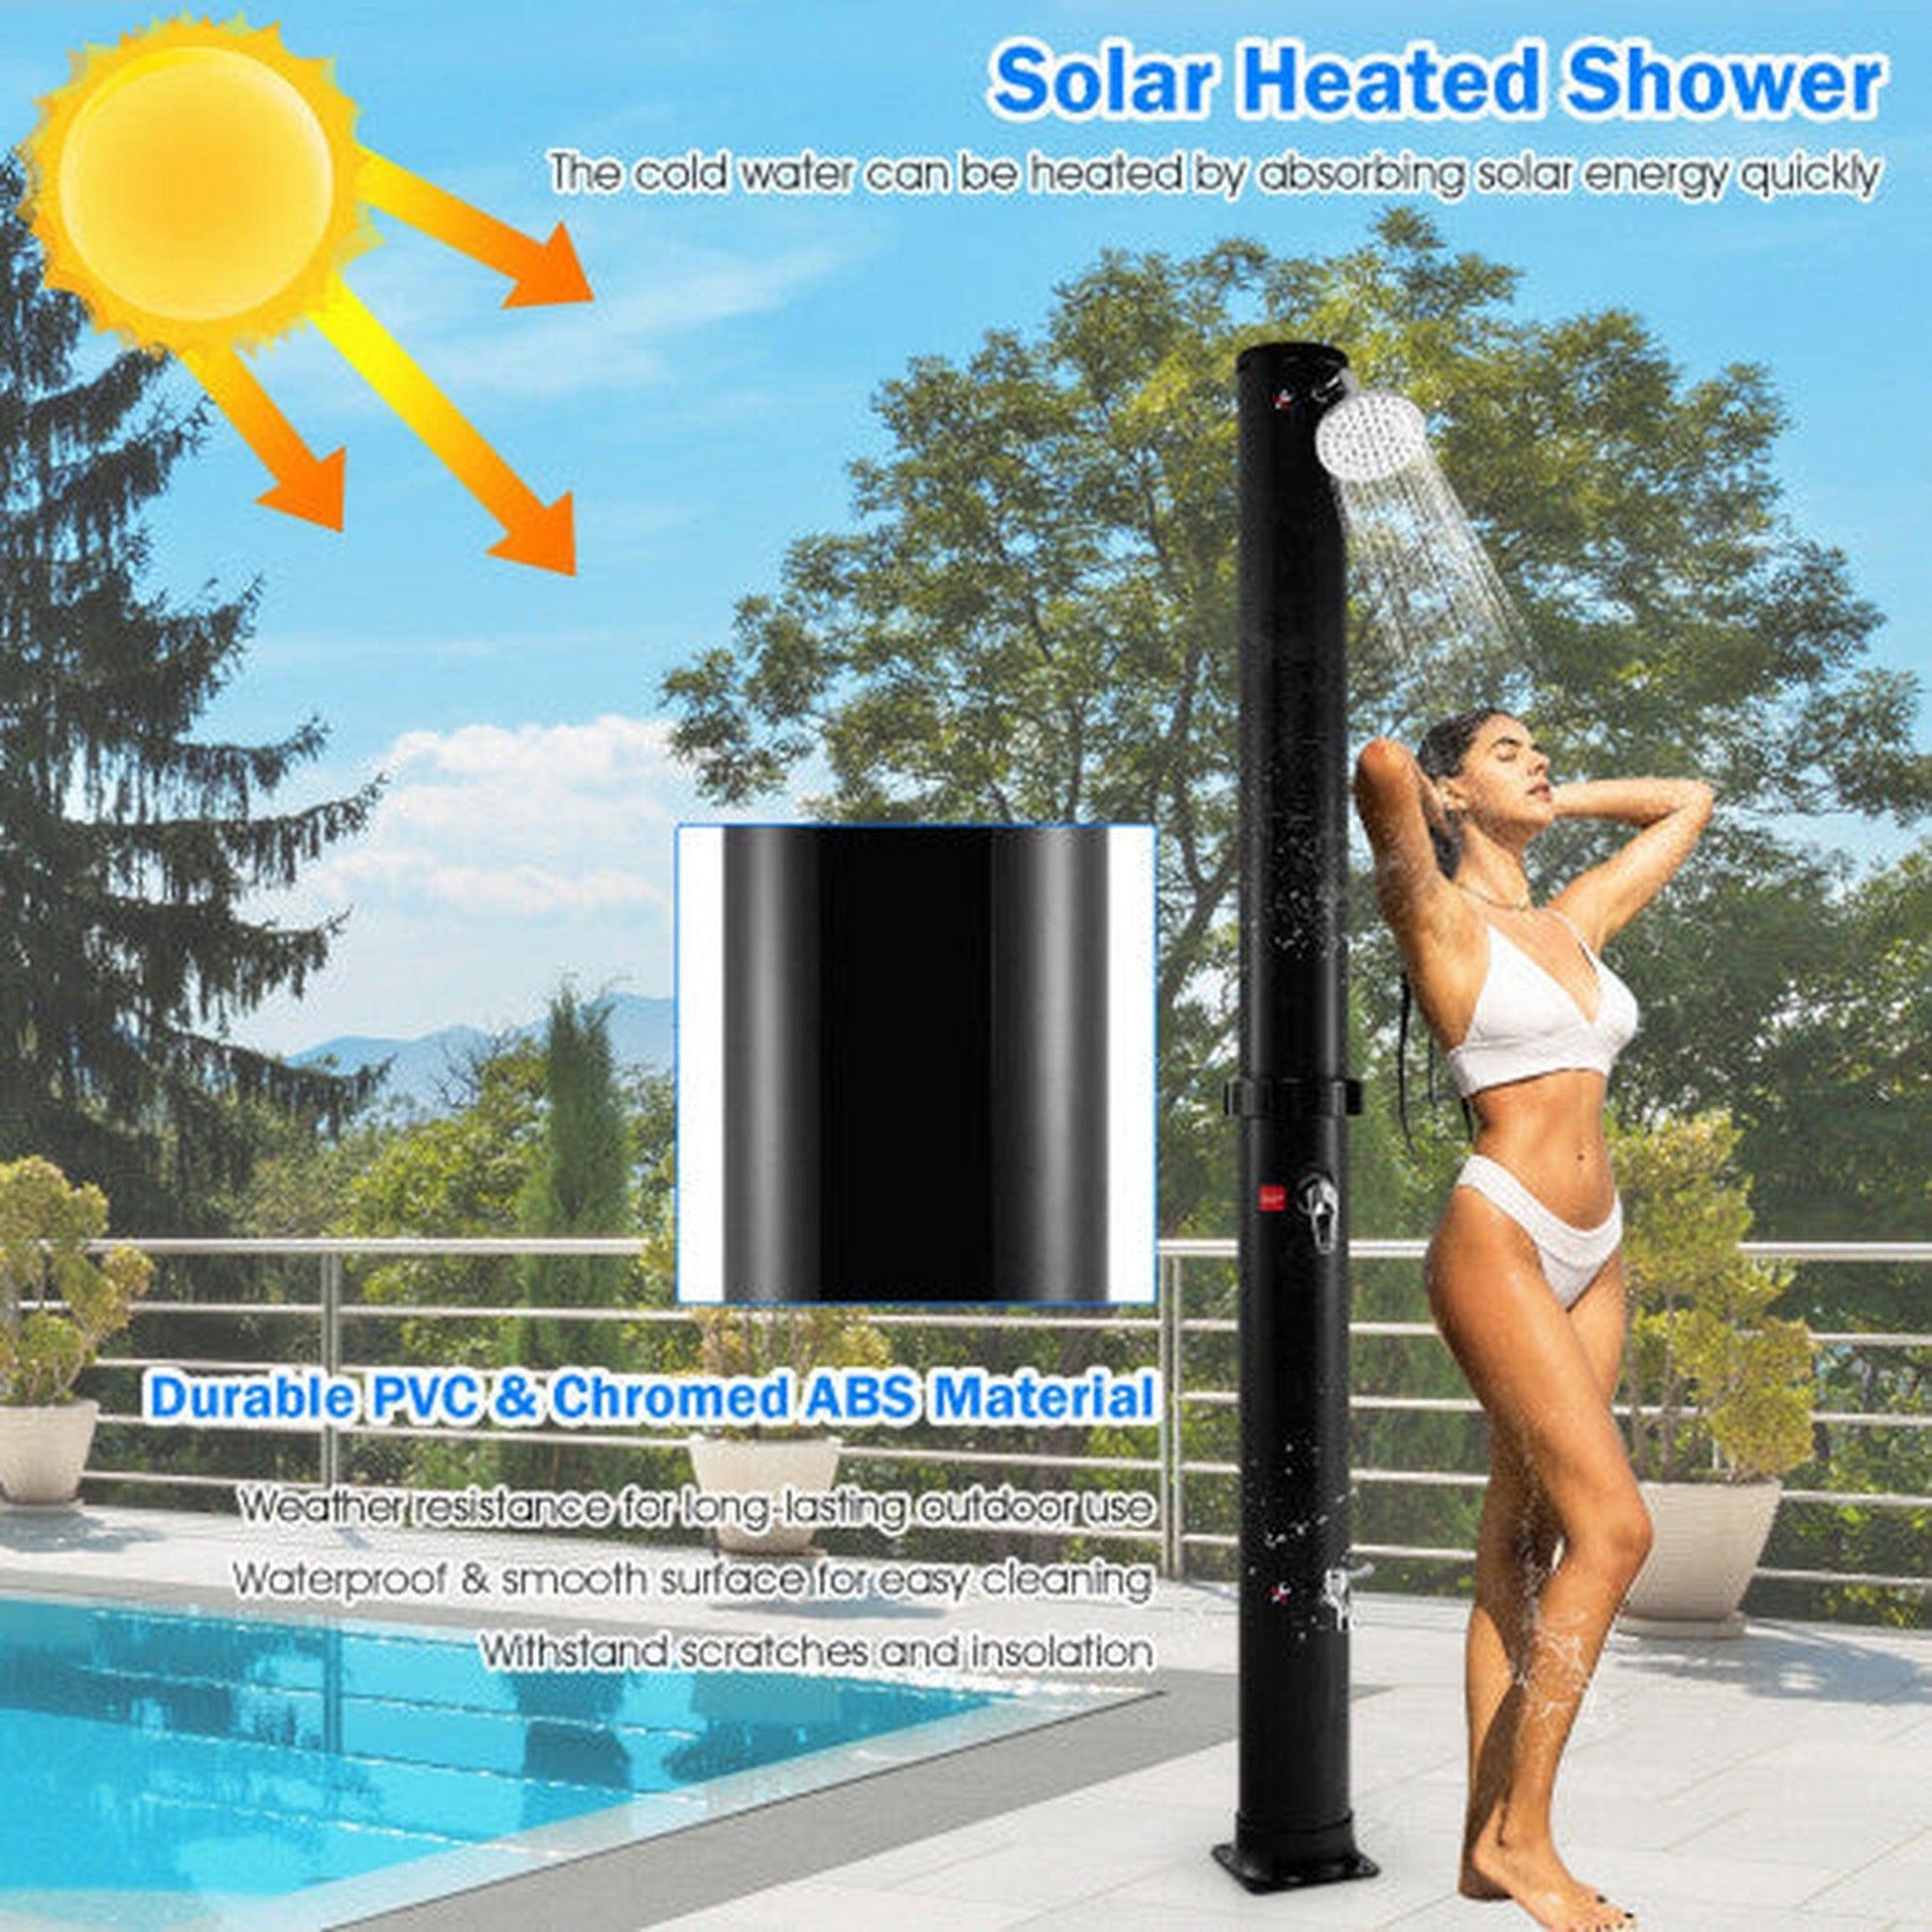 Costway 7.2' NP10570 Solar-Heated Outdoor Shower with Free-Rotating Shower Head